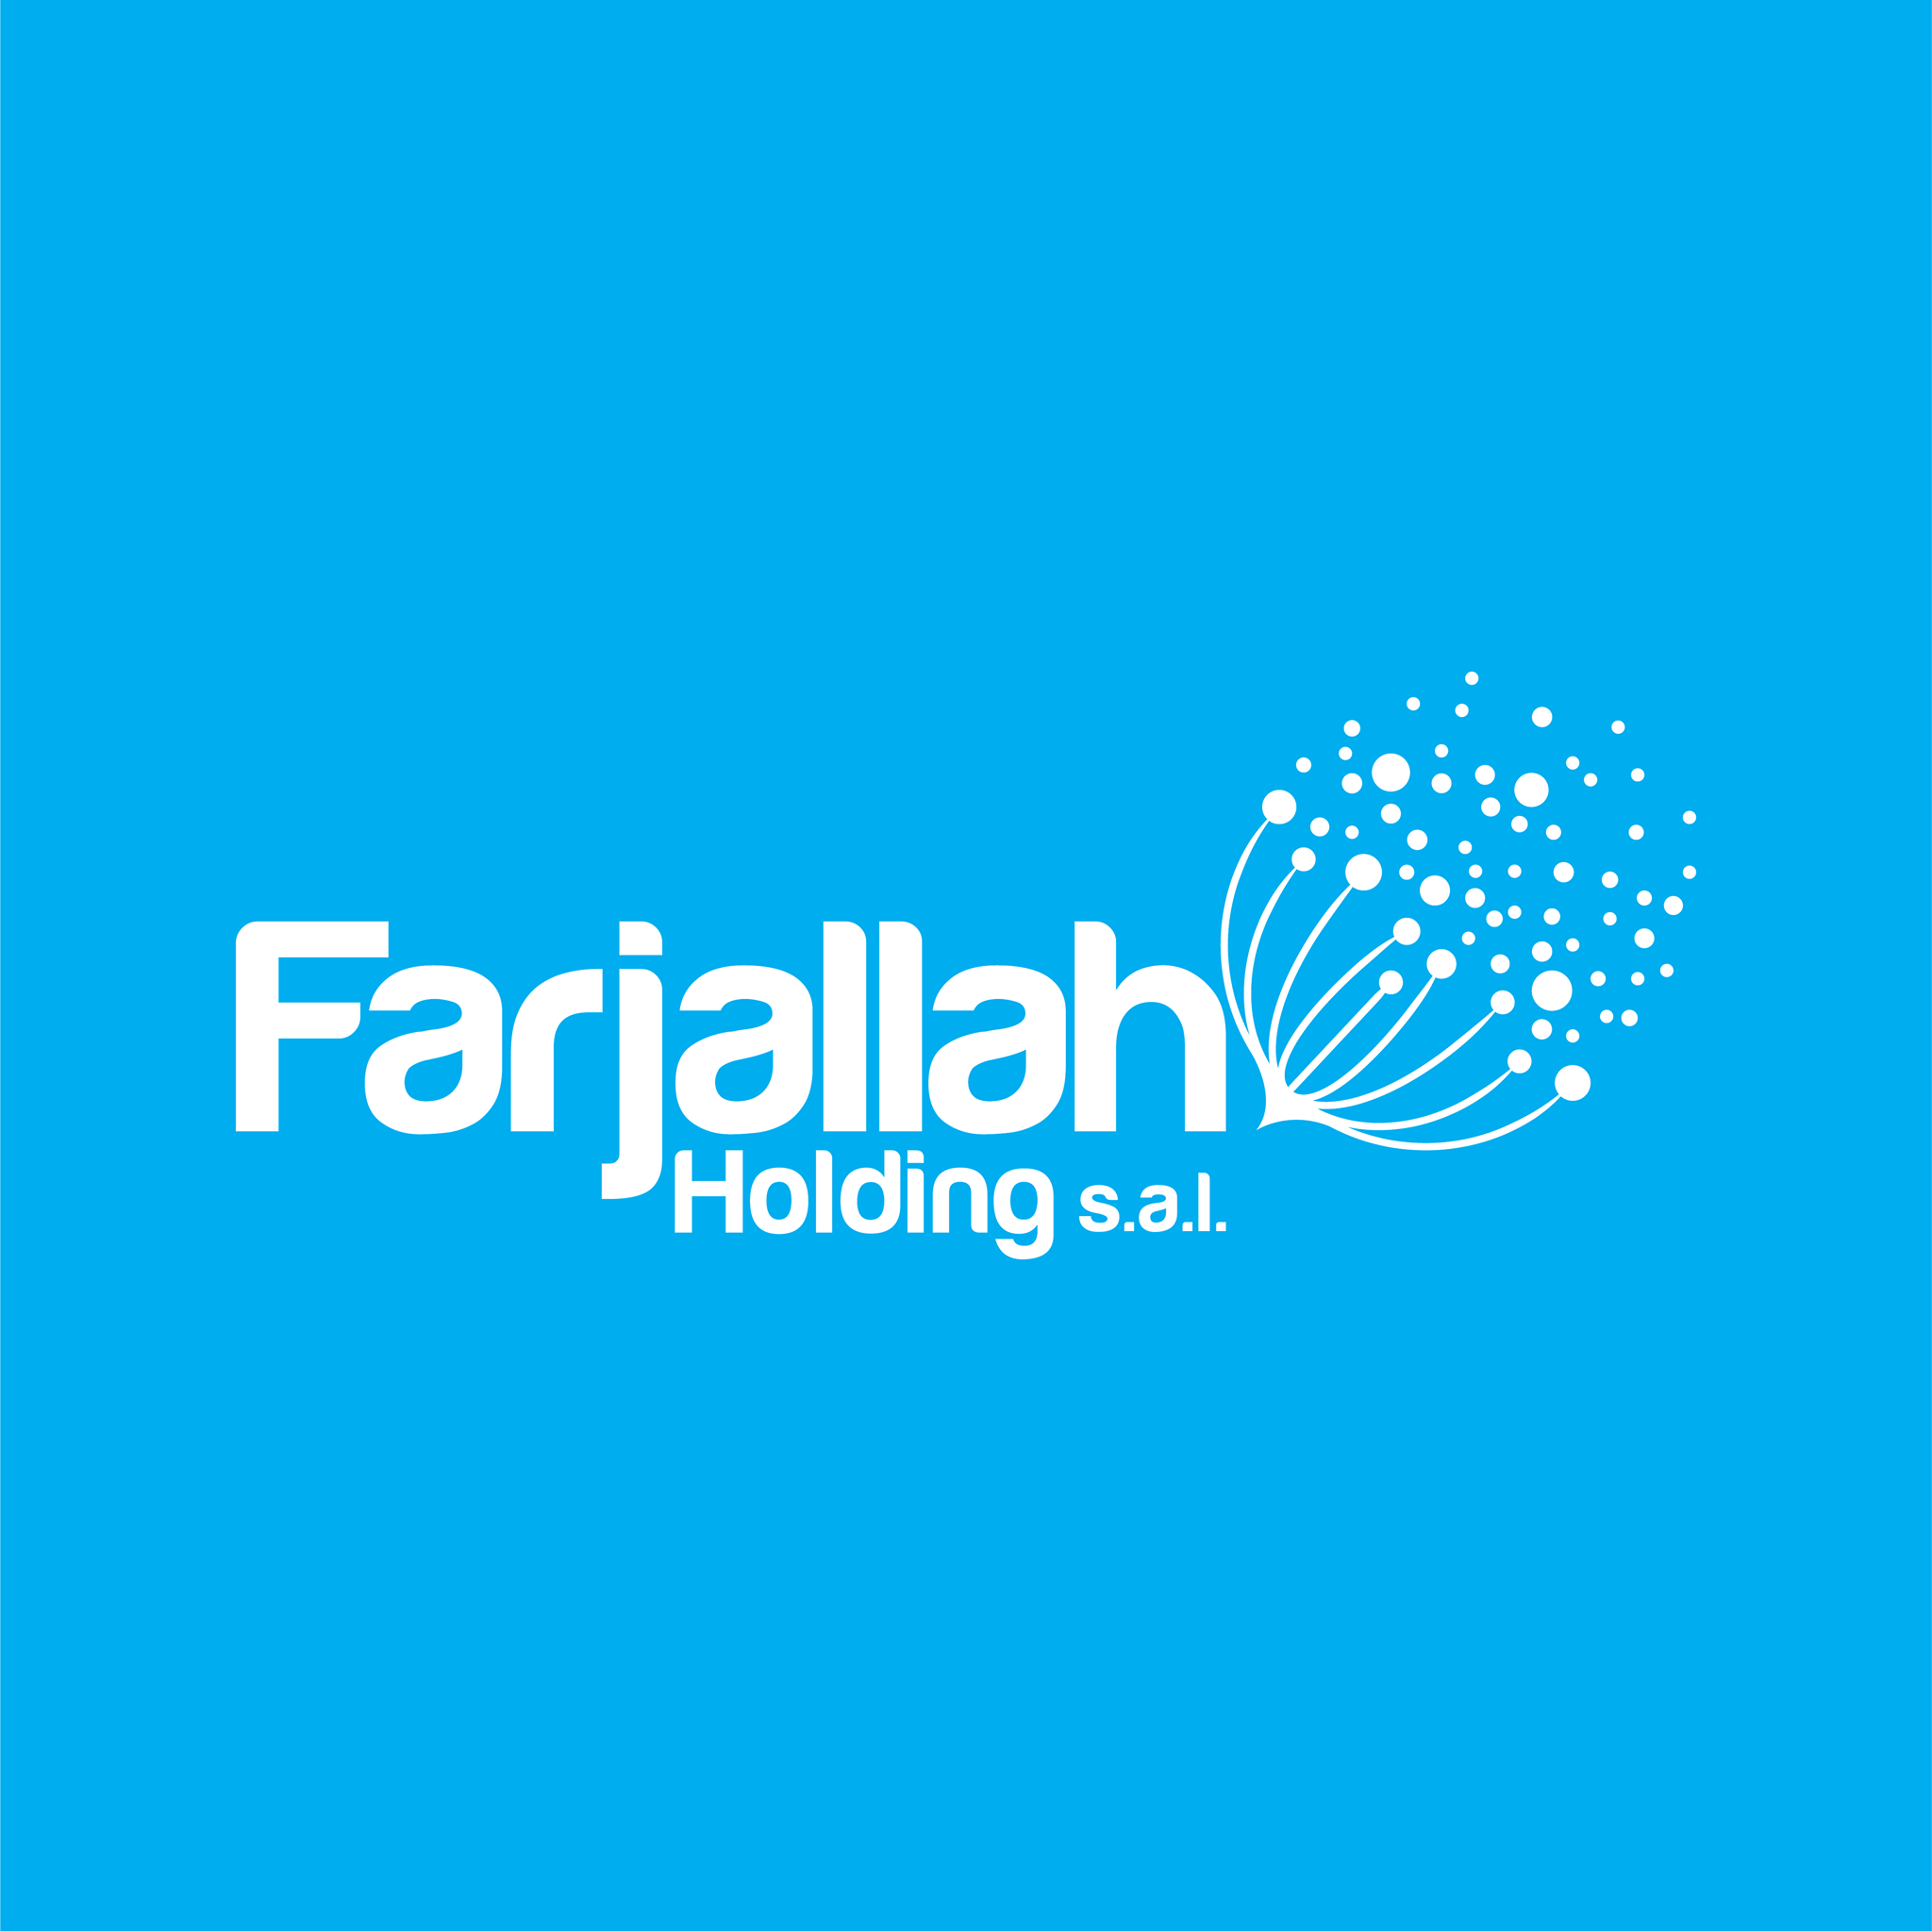 Farjallah Holding S.A.L